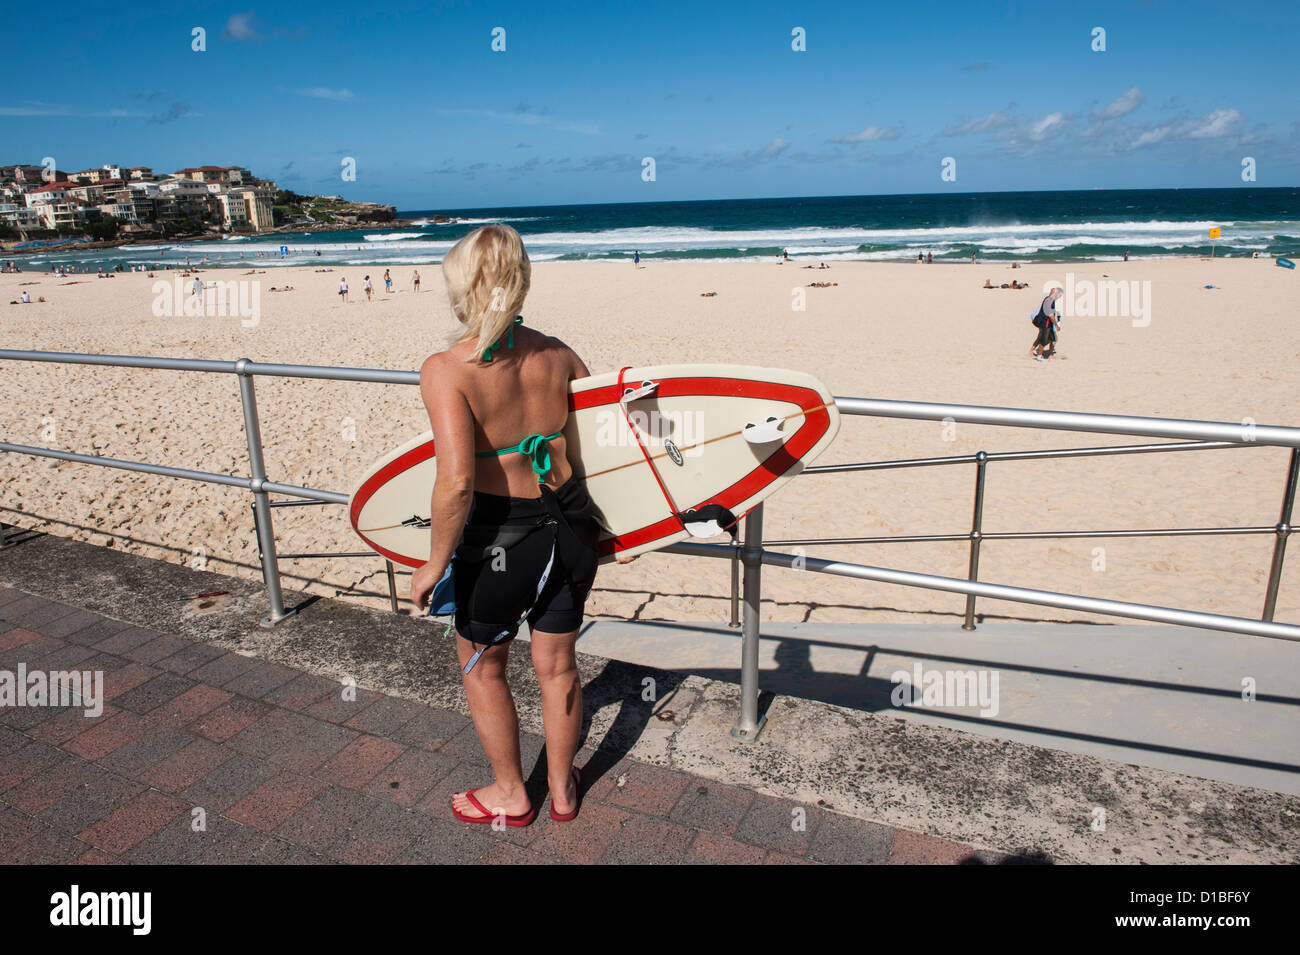 Bondi Beach is a world famous surfing beach and mostly full of surfers, swimmers, foreign tourists and even yoga practitioners. Stock Photo